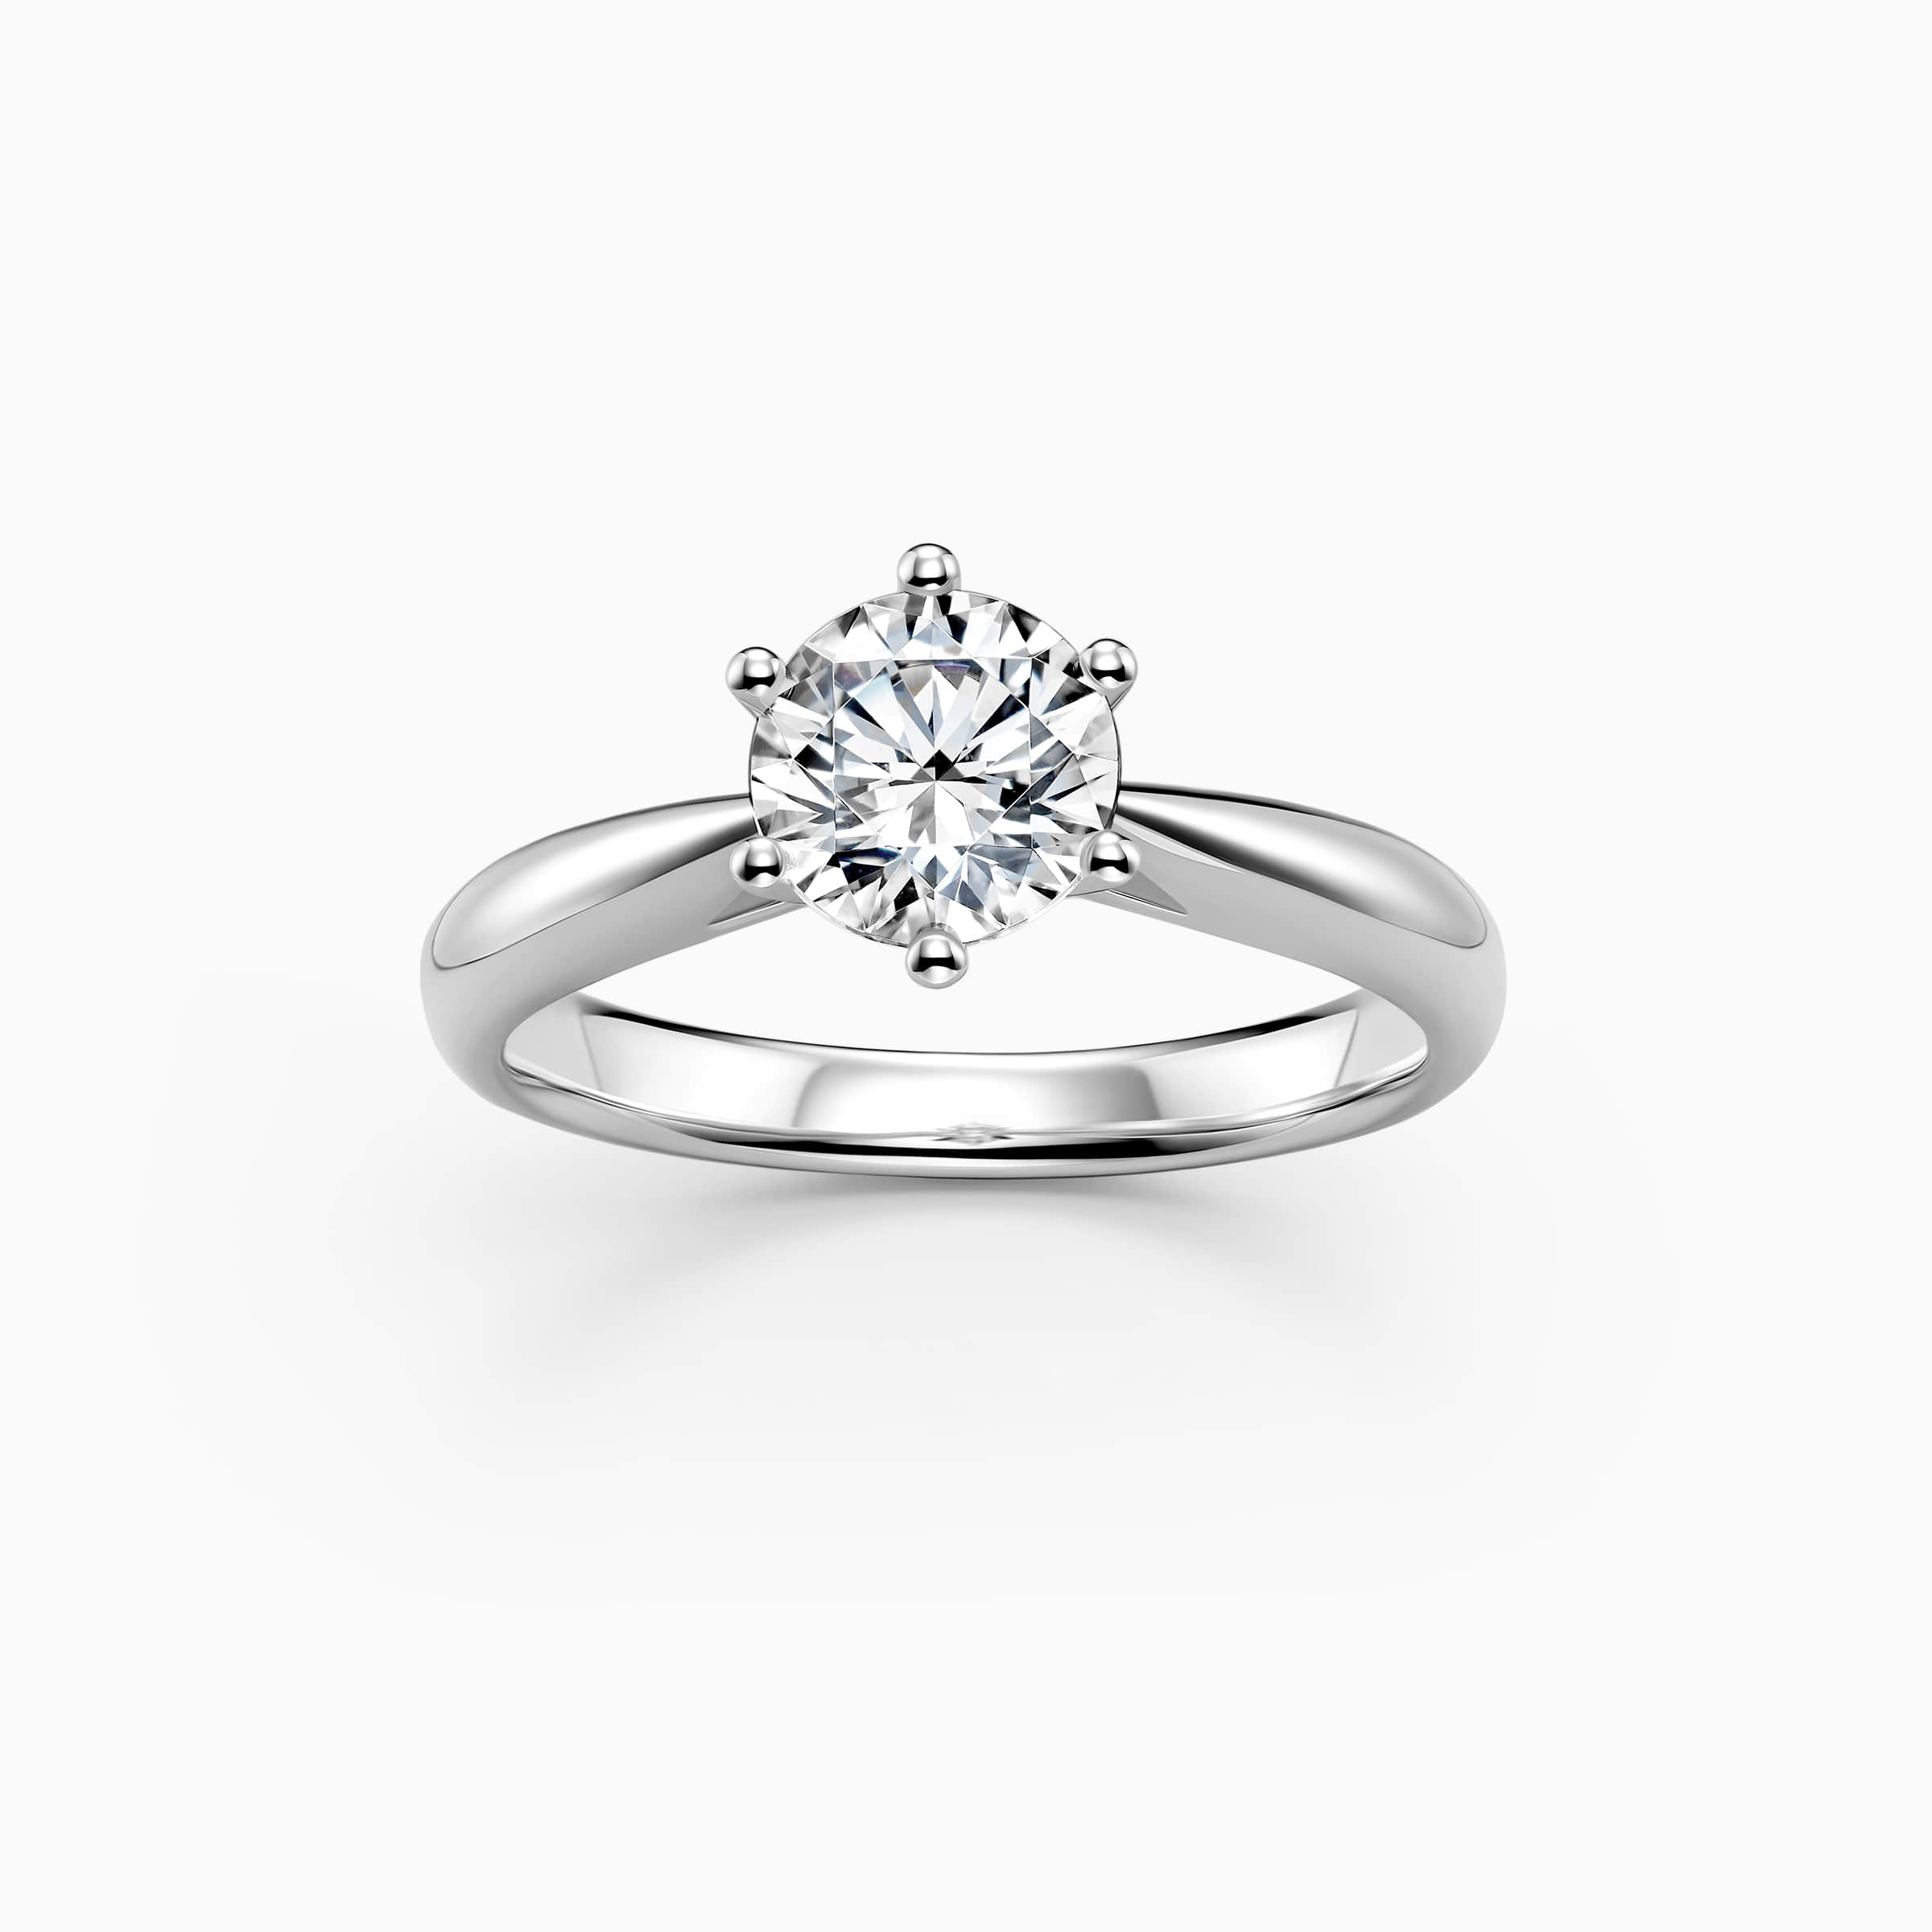 Darry Ring 6 prong promise ring